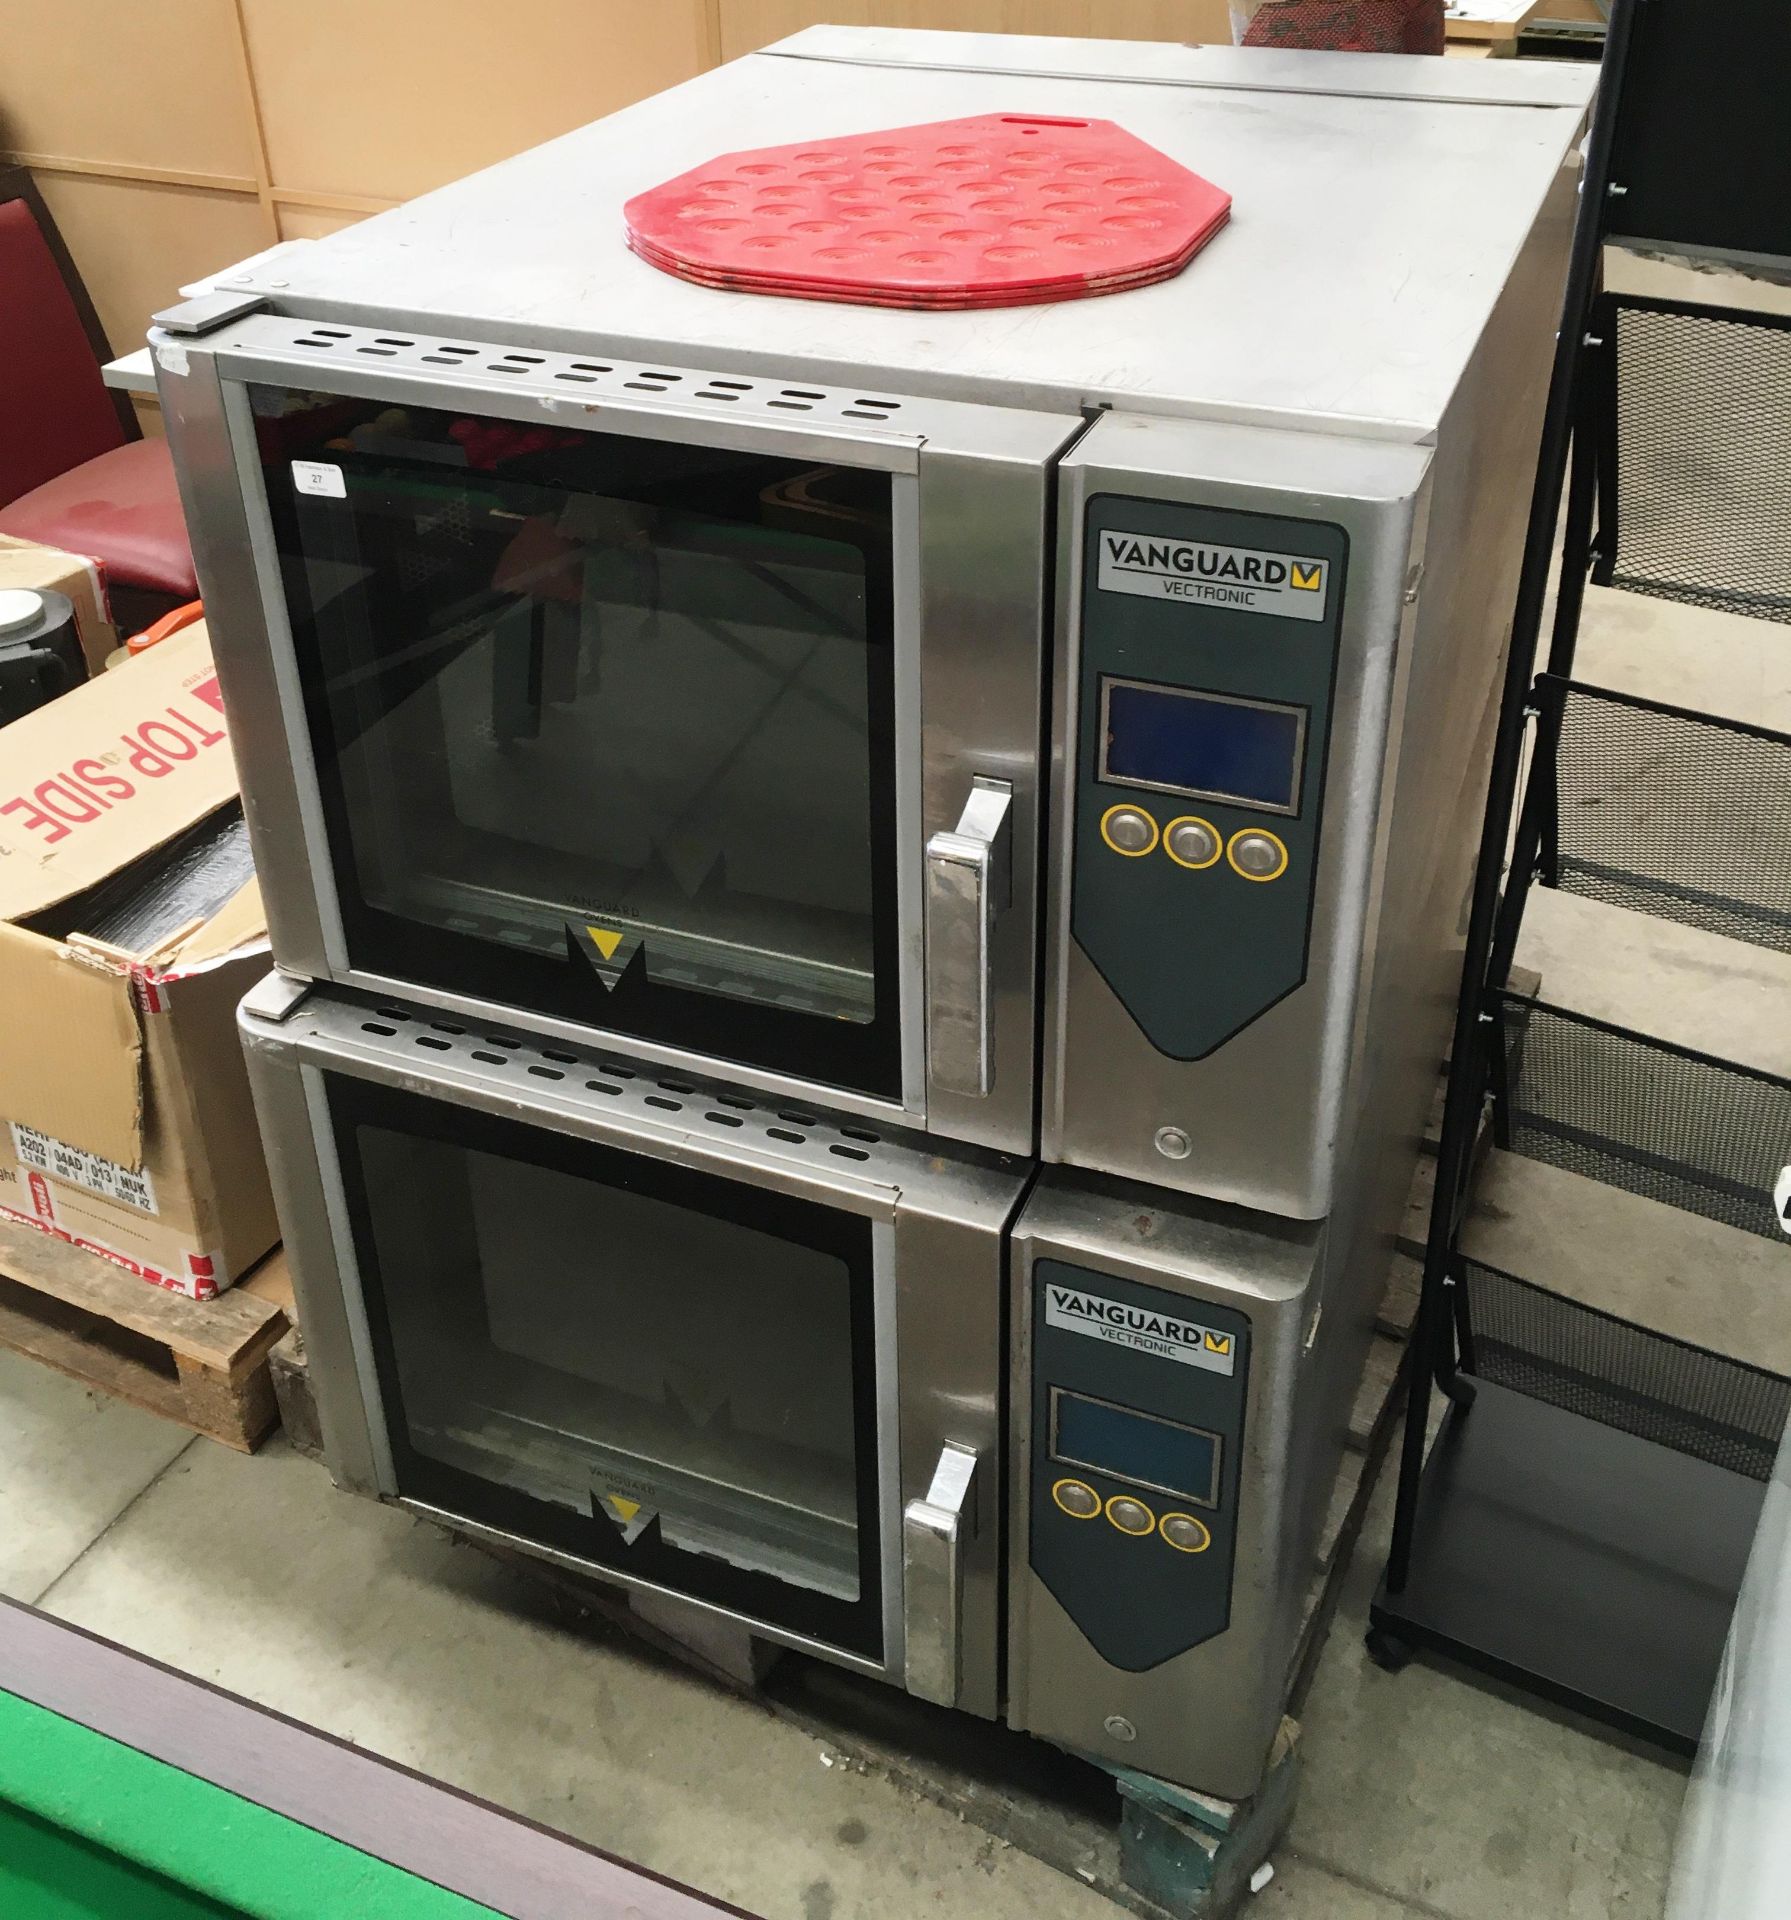 Vanguard Vectronic two tier stainless steel cased catering oven type 458M, - Image 2 of 4